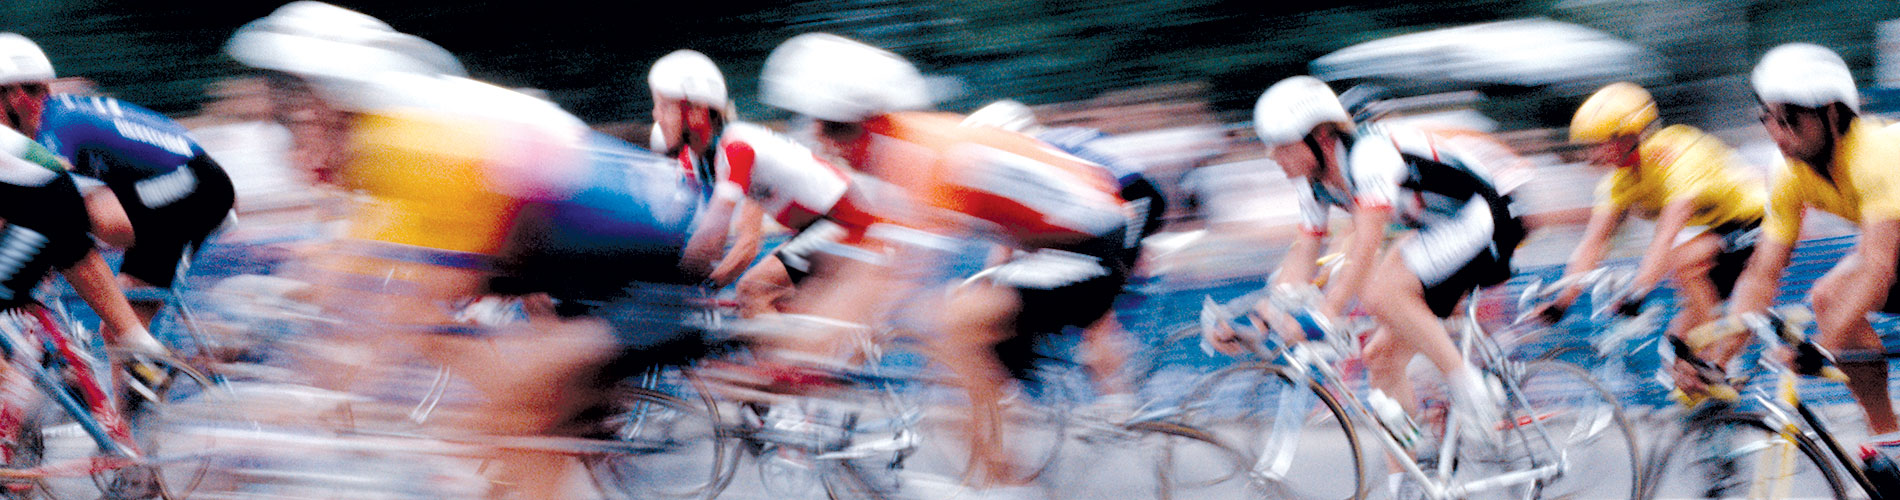 Cyclists during the race